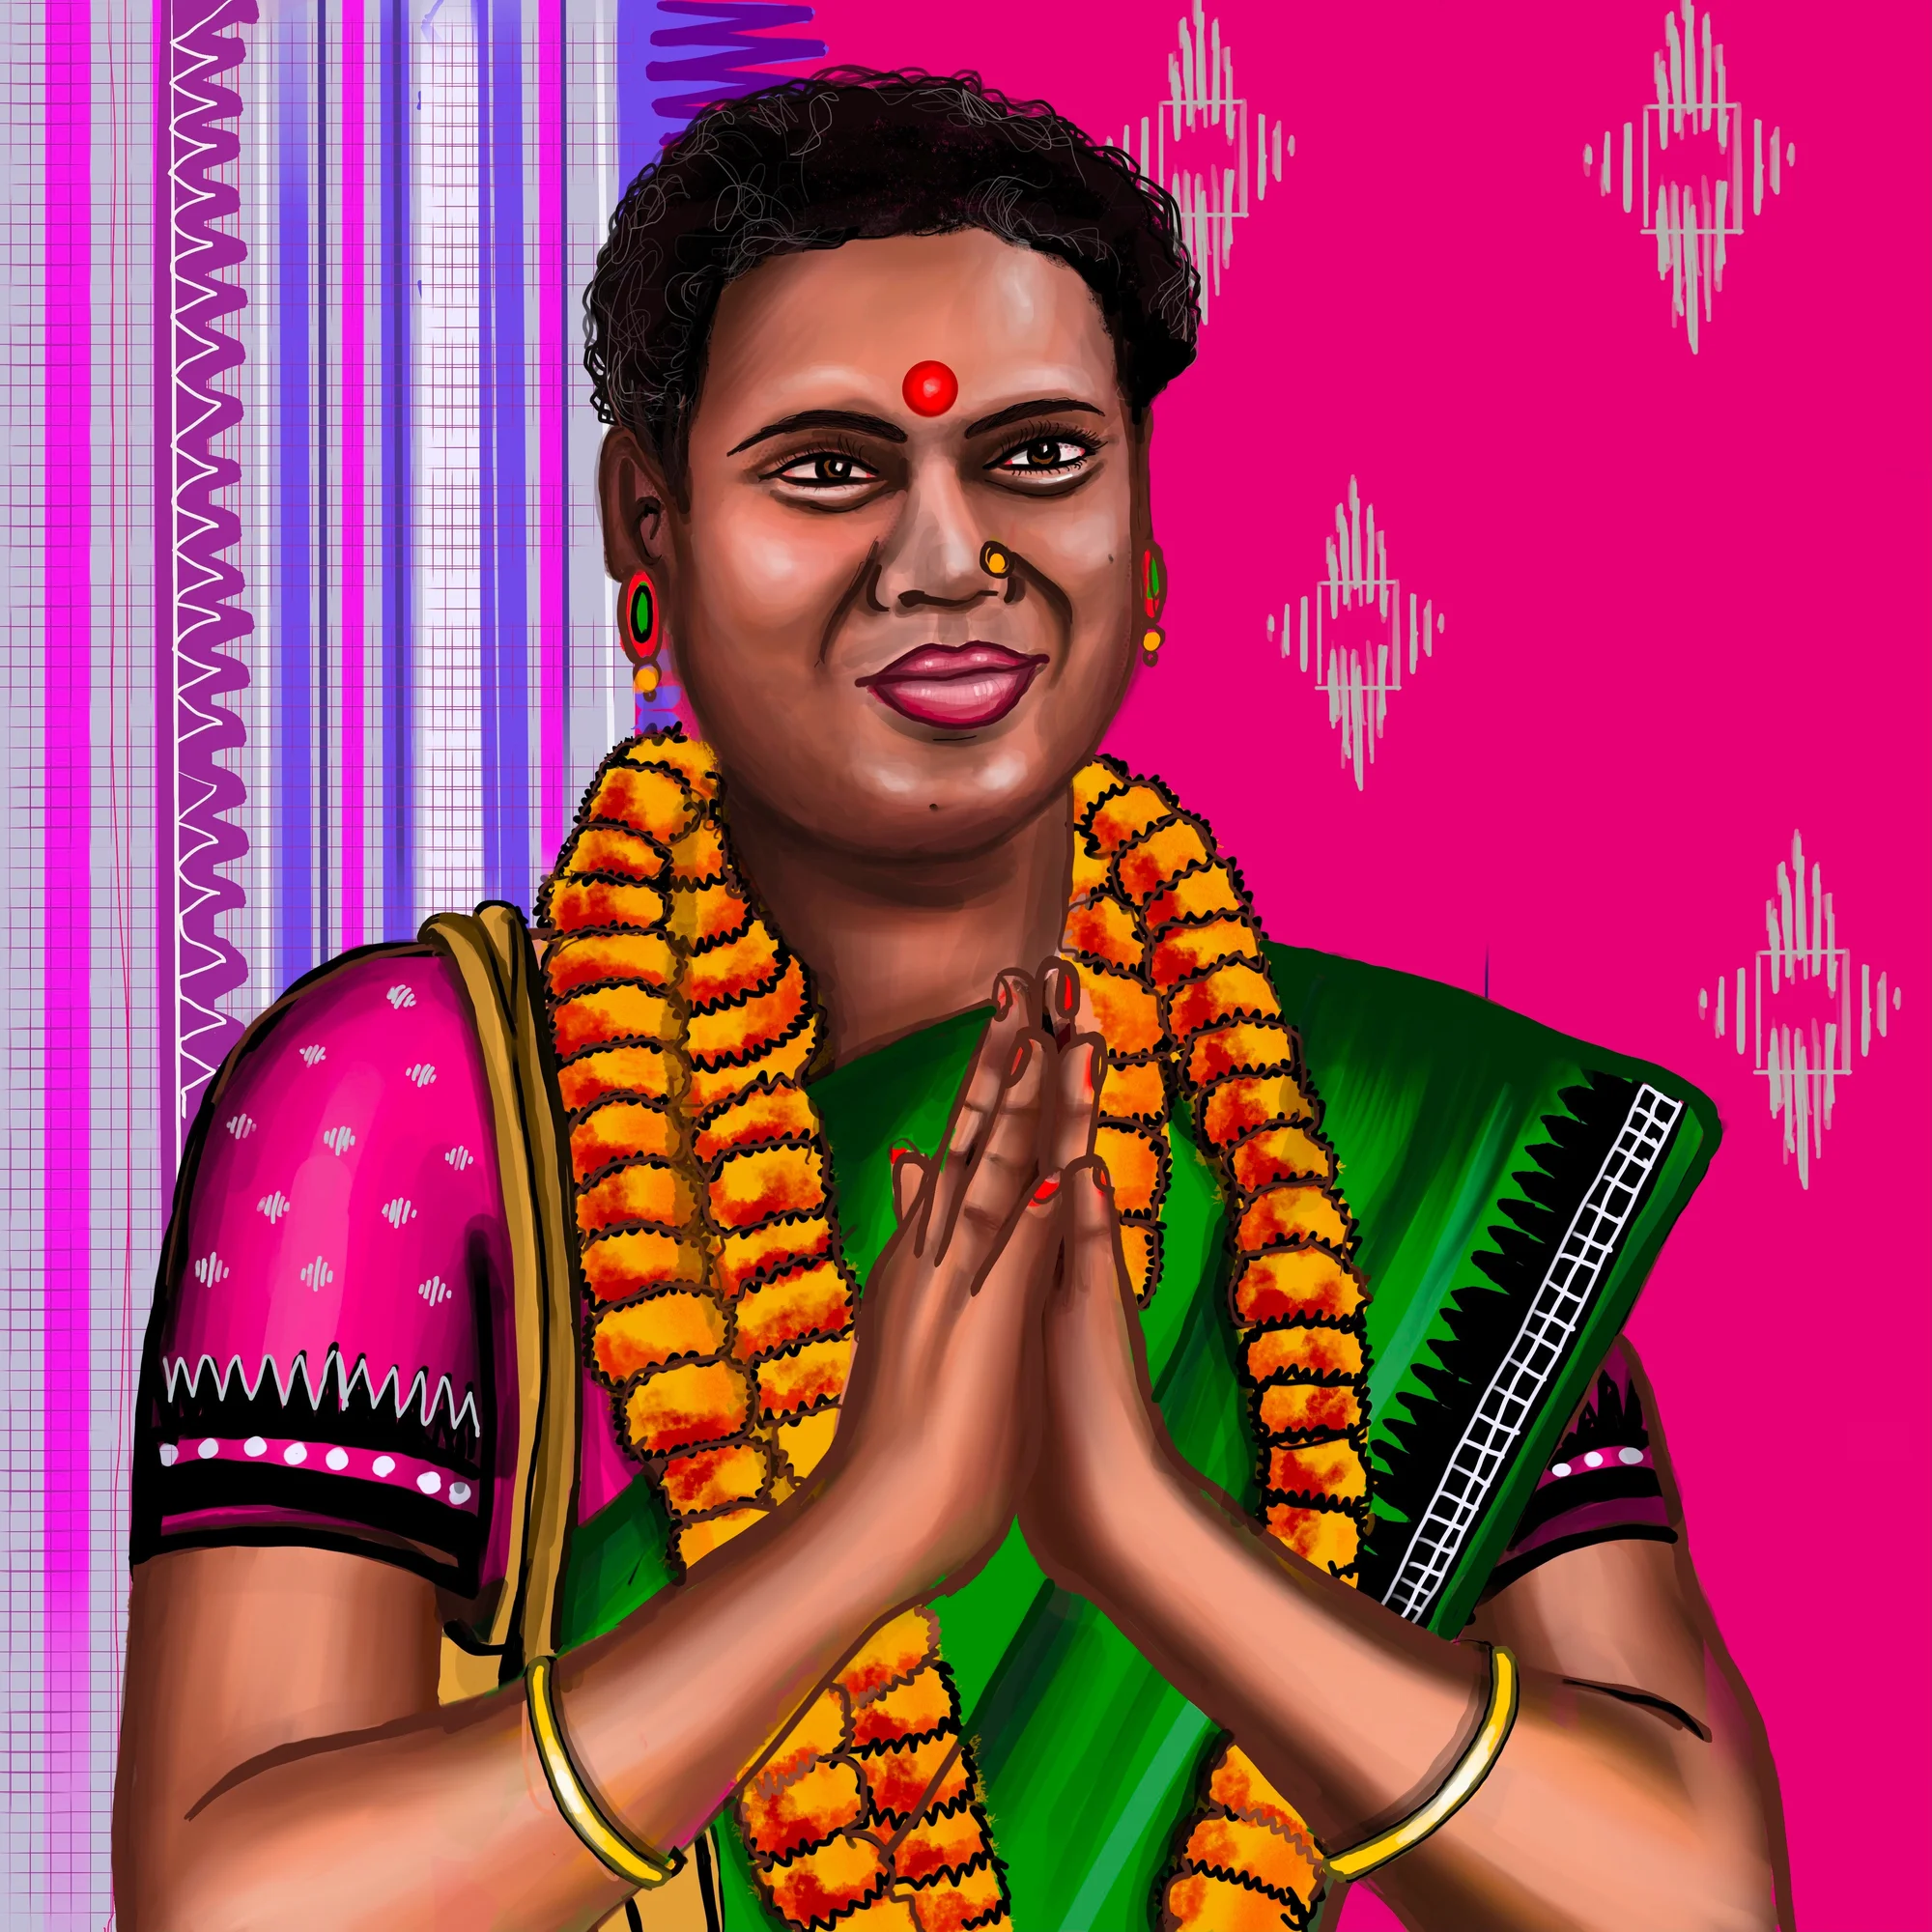 Illustration of a person wearing traditional pink and green Indian clothing, colorful earrings, red painted nails,  palms pressed together in prayer position, against a pink, purple, magenta patterned background.